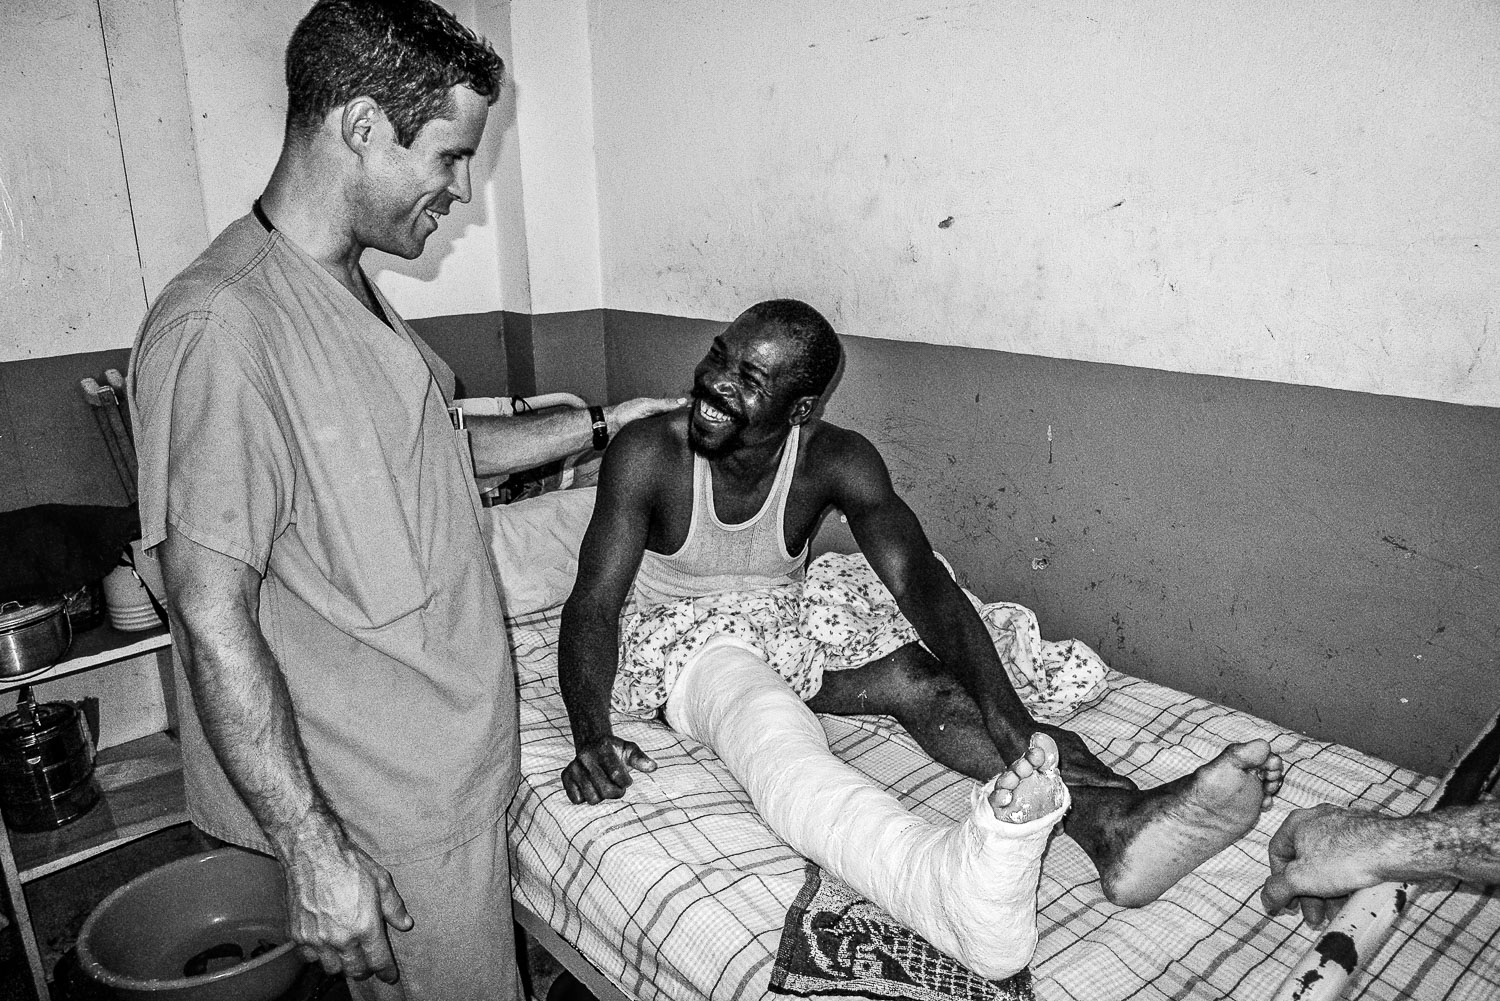  In addition to his clinical load in Santa Domingo, Scott would make 2 or 3 volunteer trips a year to the Justinian University Hospital in Cap Haitien, Haiti. 